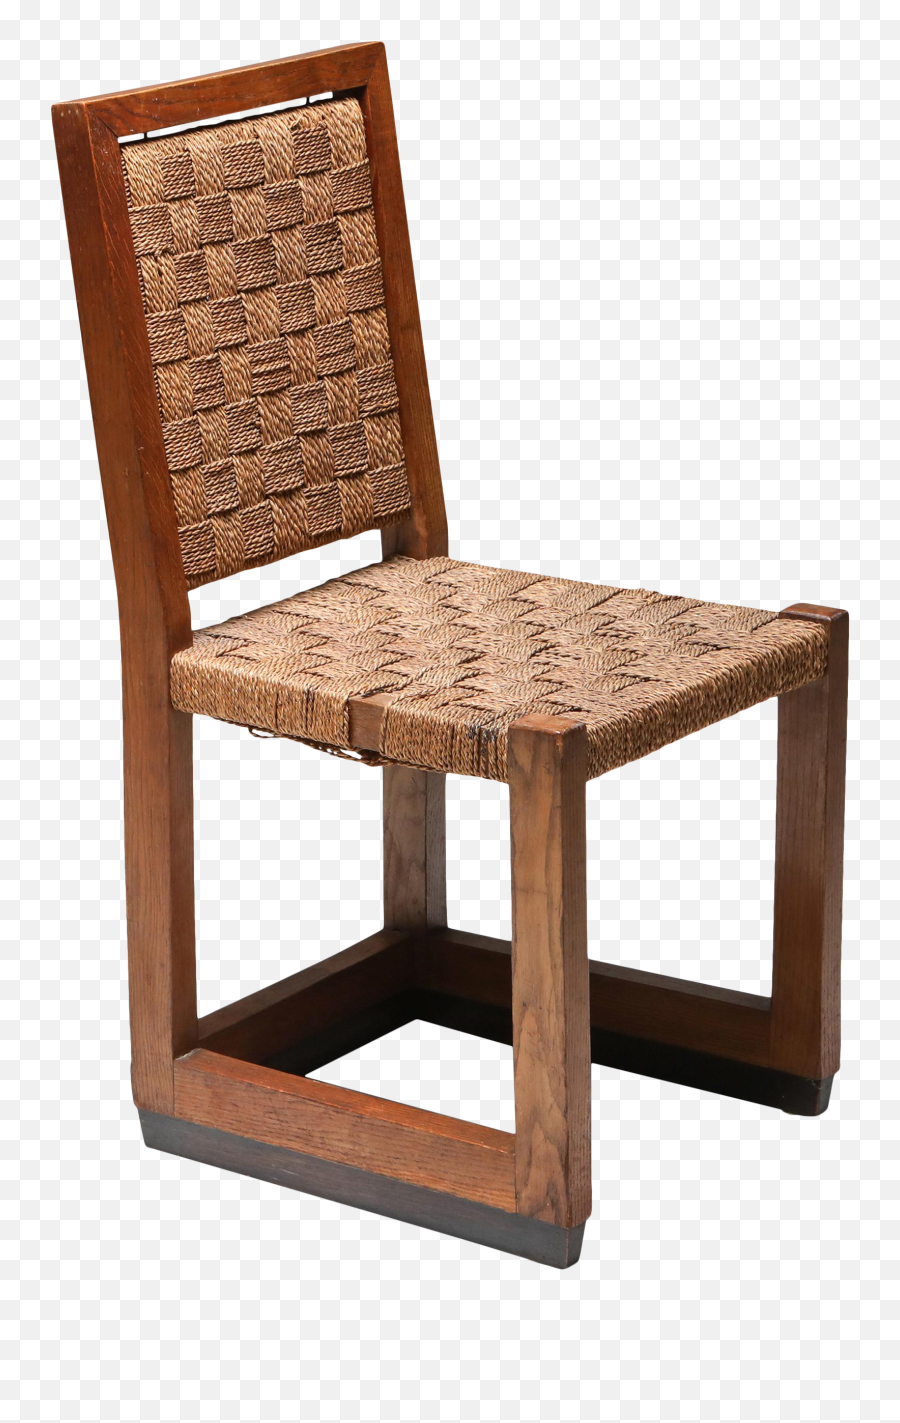 1920s Hague School Chair With Cord Seating - Solid Back Png,School Chair Png